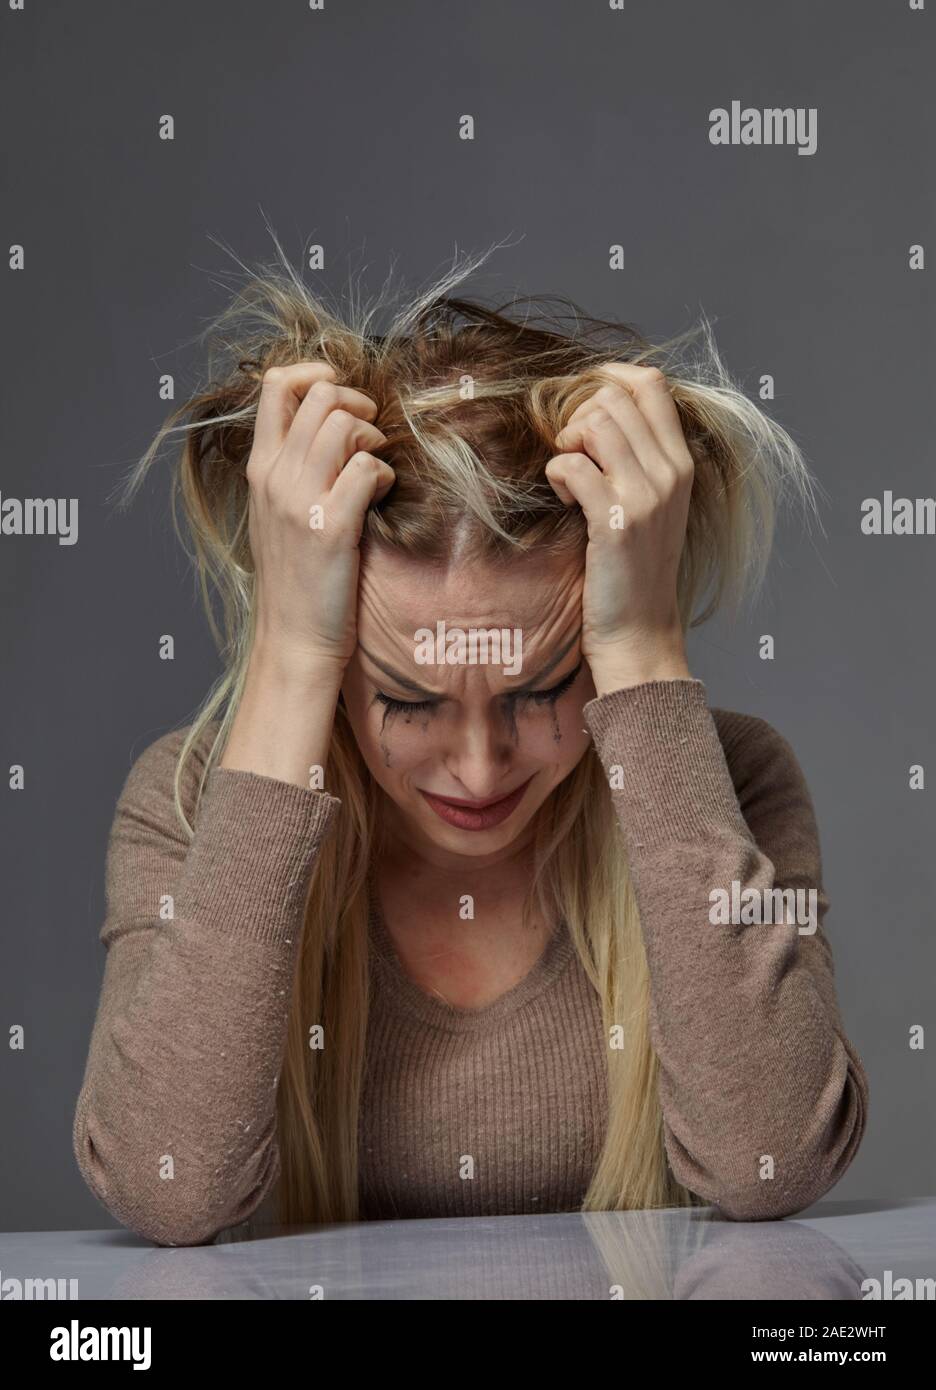 woman suffering from stress or headache while being offended by pain, Stock Photo